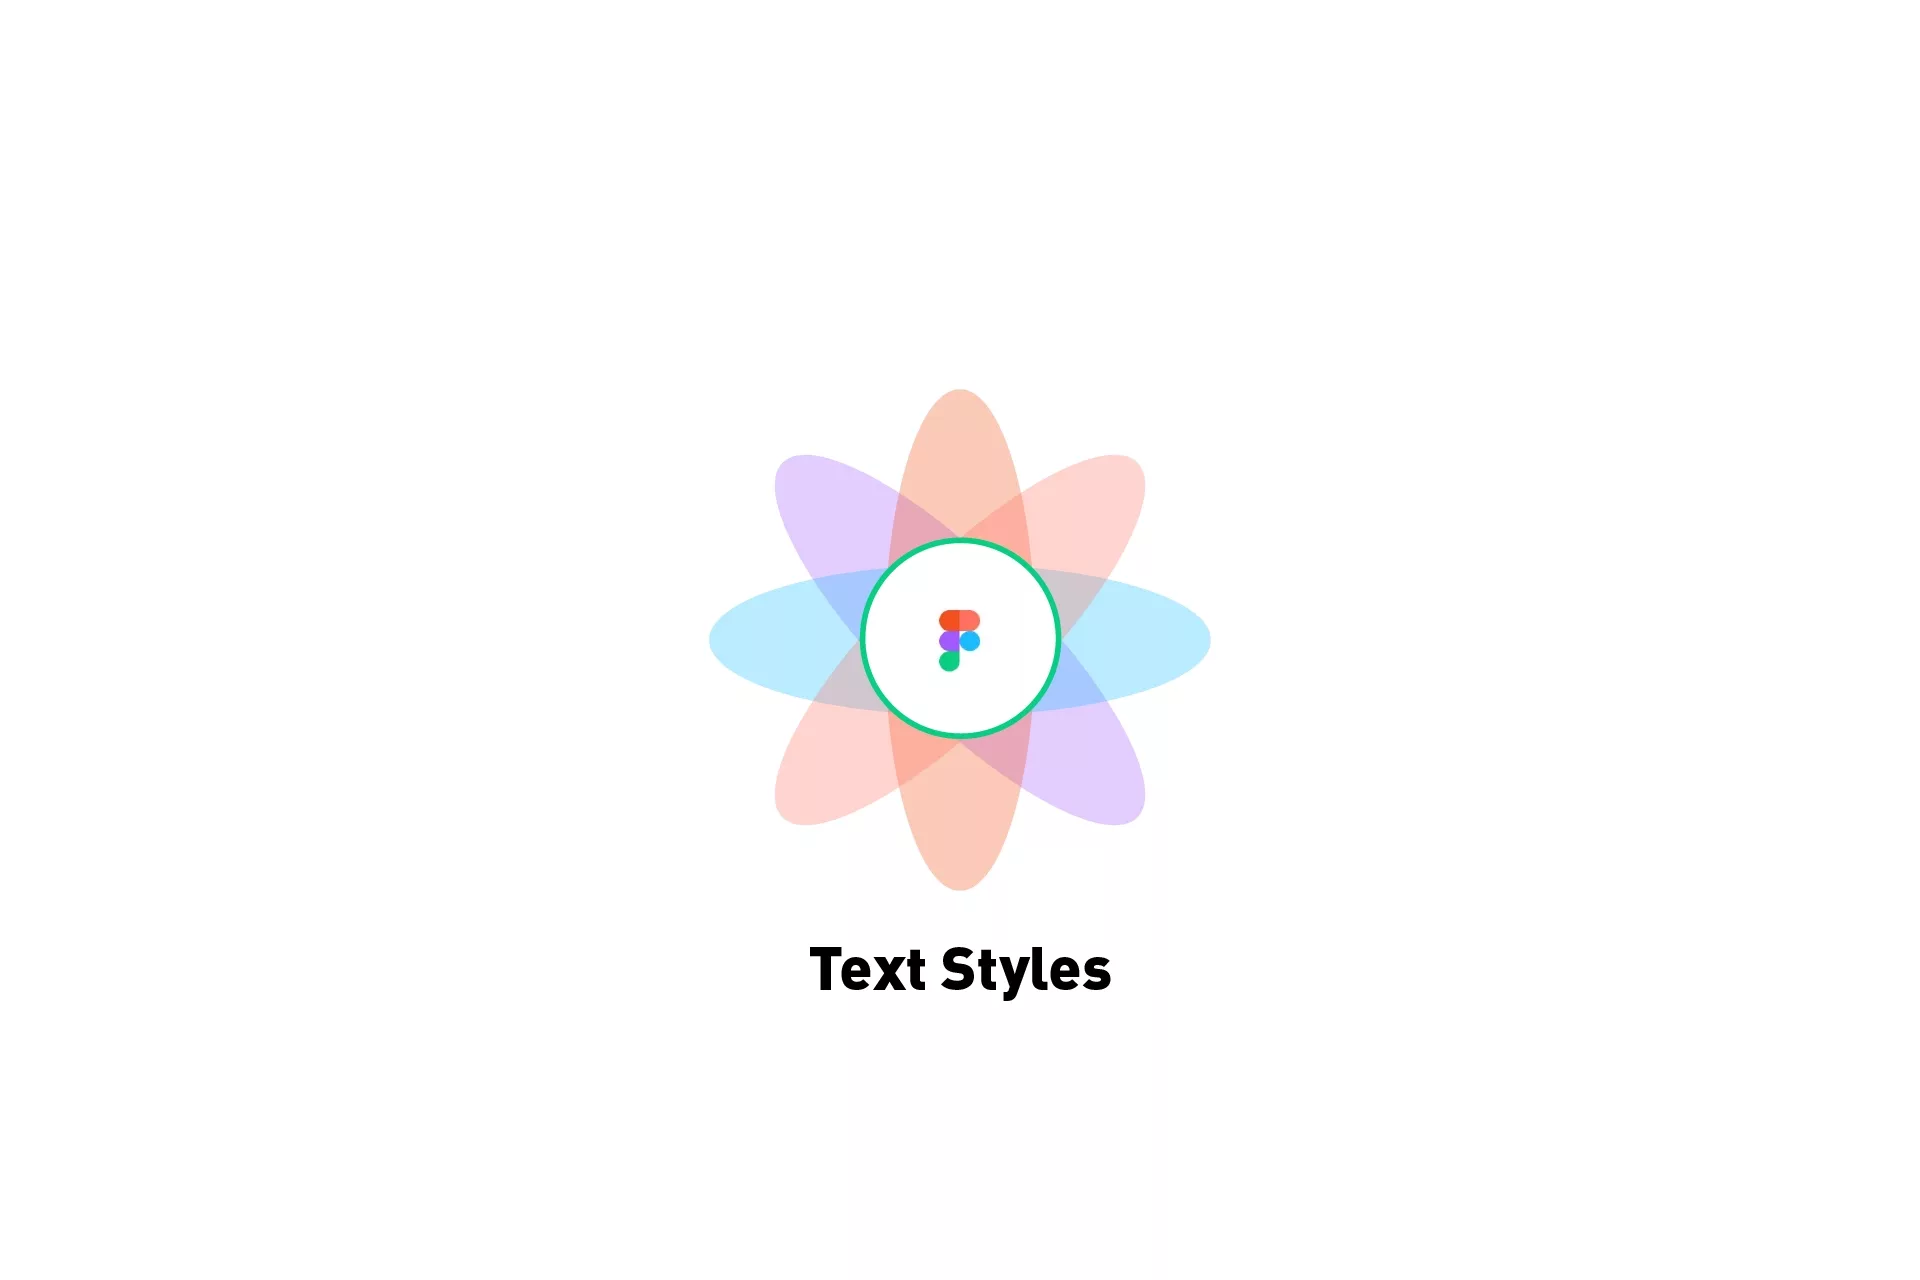 A flower that symbolized Figma with the text 'text styles' below it.